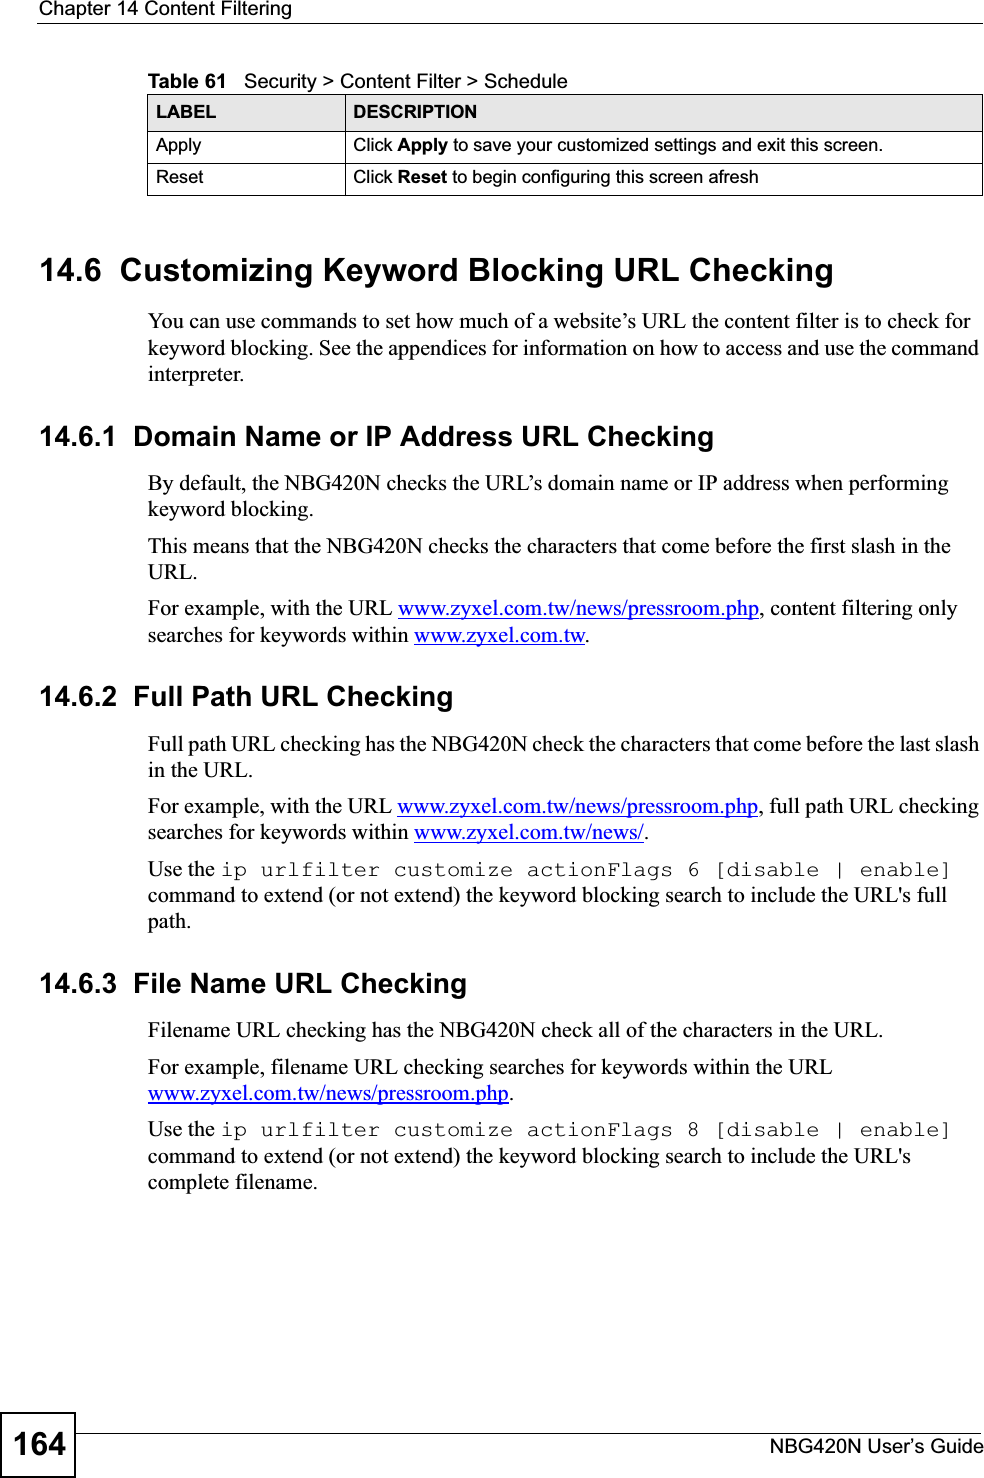 Chapter 14 Content FilteringNBG420N User’s Guide16414.6  Customizing Keyword Blocking URL CheckingYou can use commands to set how much of a website’s URL the content filter is to check for keyword blocking. See the appendices for information on how to access and use the command interpreter.14.6.1  Domain Name or IP Address URL CheckingBy default, the NBG420N checks the URL’s domain name or IP address when performing keyword blocking.This means that the NBG420N checks the characters that come before the first slash in the URL.For example, with the URL www.zyxel.com.tw/news/pressroom.php, content filtering only searches for keywords within www.zyxel.com.tw.14.6.2  Full Path URL CheckingFull path URL checking has the NBG420N check the characters that come before the last slash in the URL.For example, with the URL www.zyxel.com.tw/news/pressroom.php, full path URL checking searches for keywords within www.zyxel.com.tw/news/.Use the ip urlfilter customize actionFlags 6 [disable | enable]command to extend (or not extend) the keyword blocking search to include the URL&apos;s full path.14.6.3  File Name URL CheckingFilename URL checking has the NBG420N check all of the characters in the URL.For example, filename URL checking searches for keywords within the URL www.zyxel.com.tw/news/pressroom.php.Use the ip urlfilter customize actionFlags 8 [disable | enable] command to extend (or not extend) the keyword blocking search to include the URL&apos;s complete filename.Apply Click Apply to save your customized settings and exit this screen.Reset Click Reset to begin configuring this screen afreshTable 61   Security &gt; Content Filter &gt; ScheduleLABEL DESCRIPTION